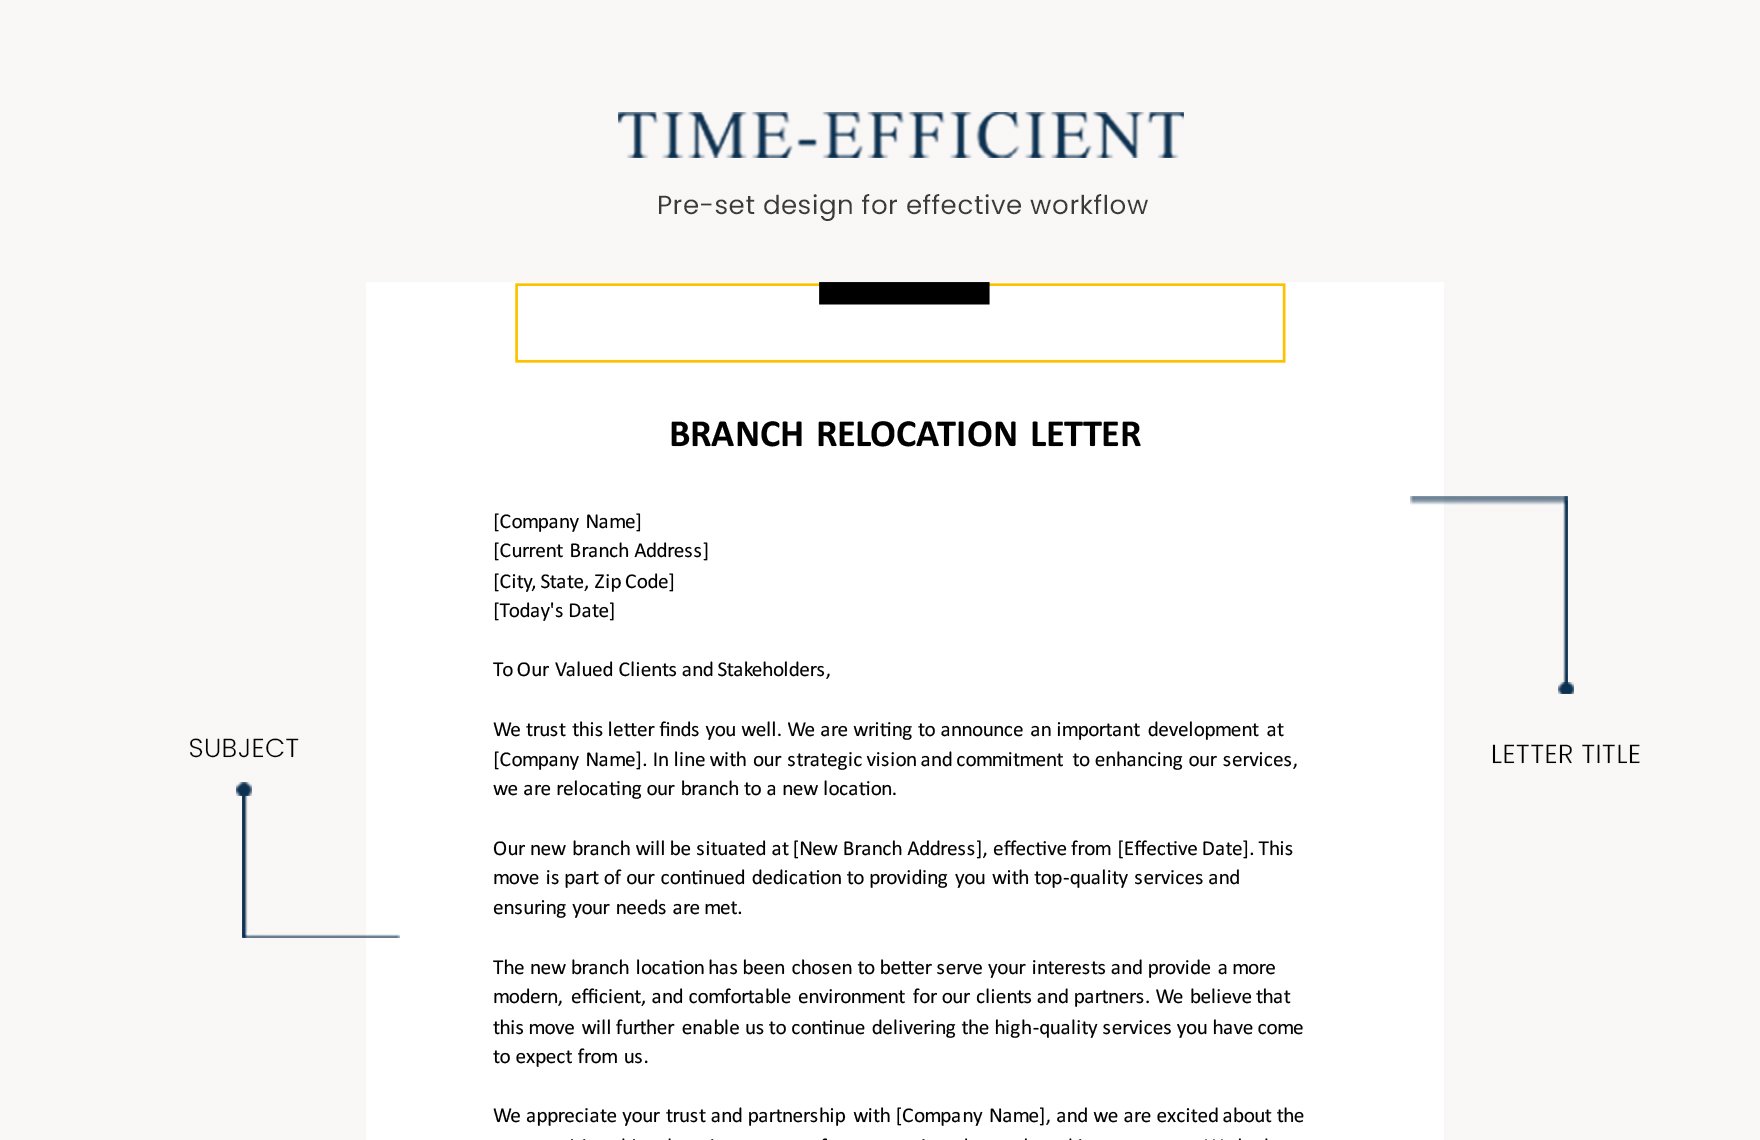 Branch Relocation Letter